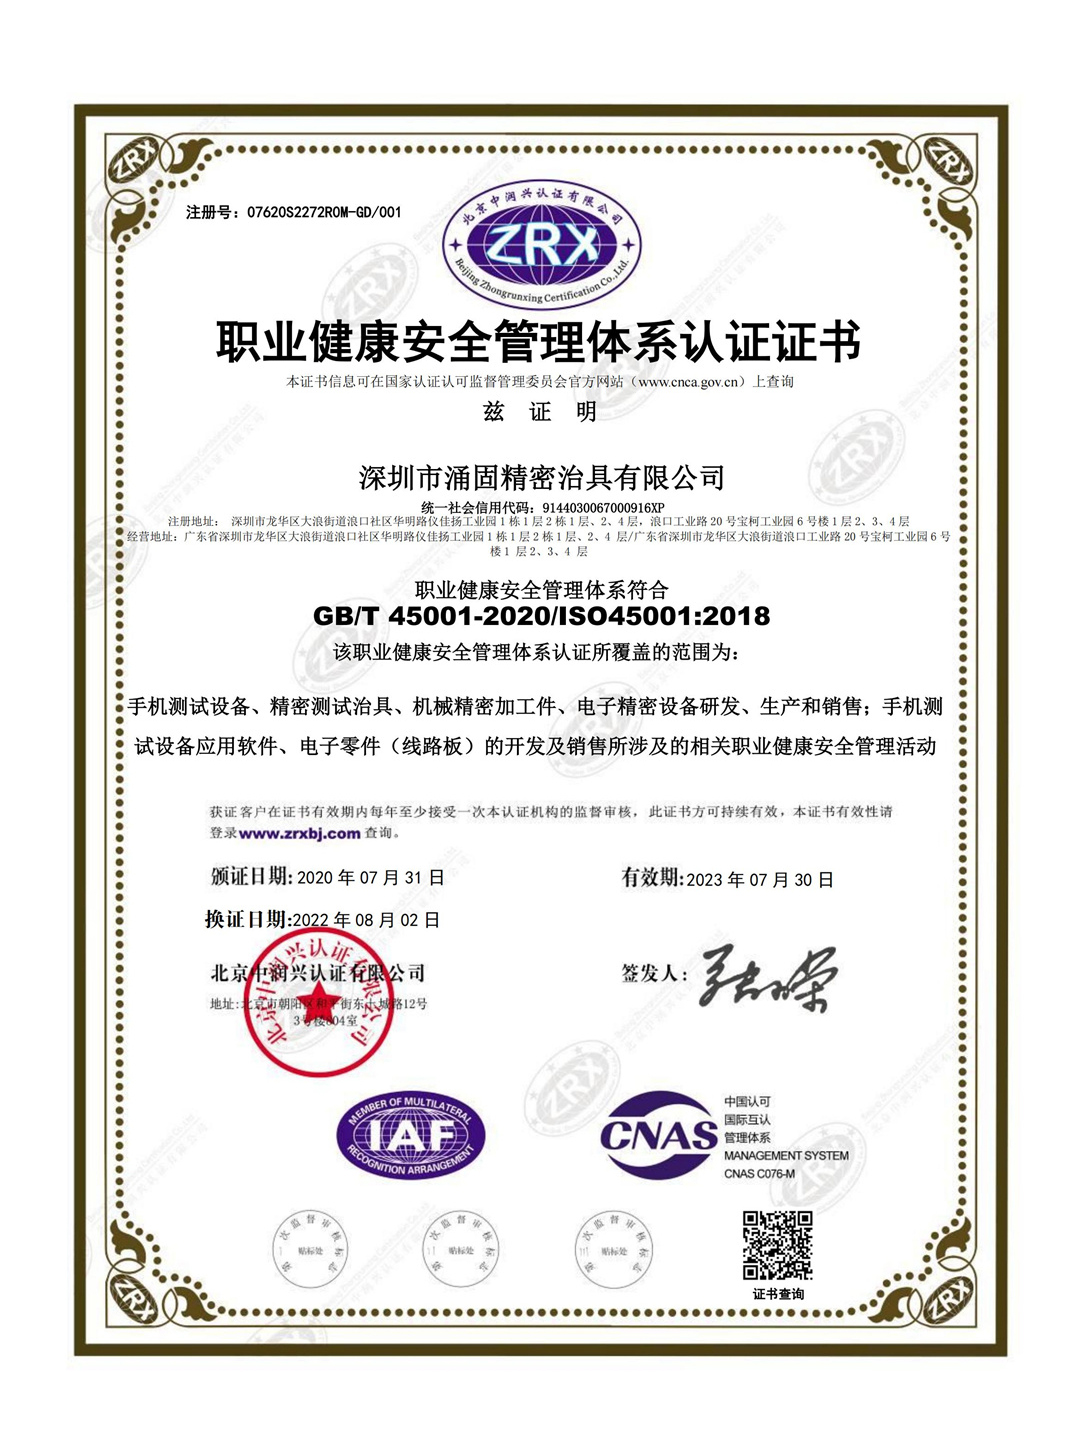 ISO45001 Occupational Health Management System Certificate Renewal (2022-2023)